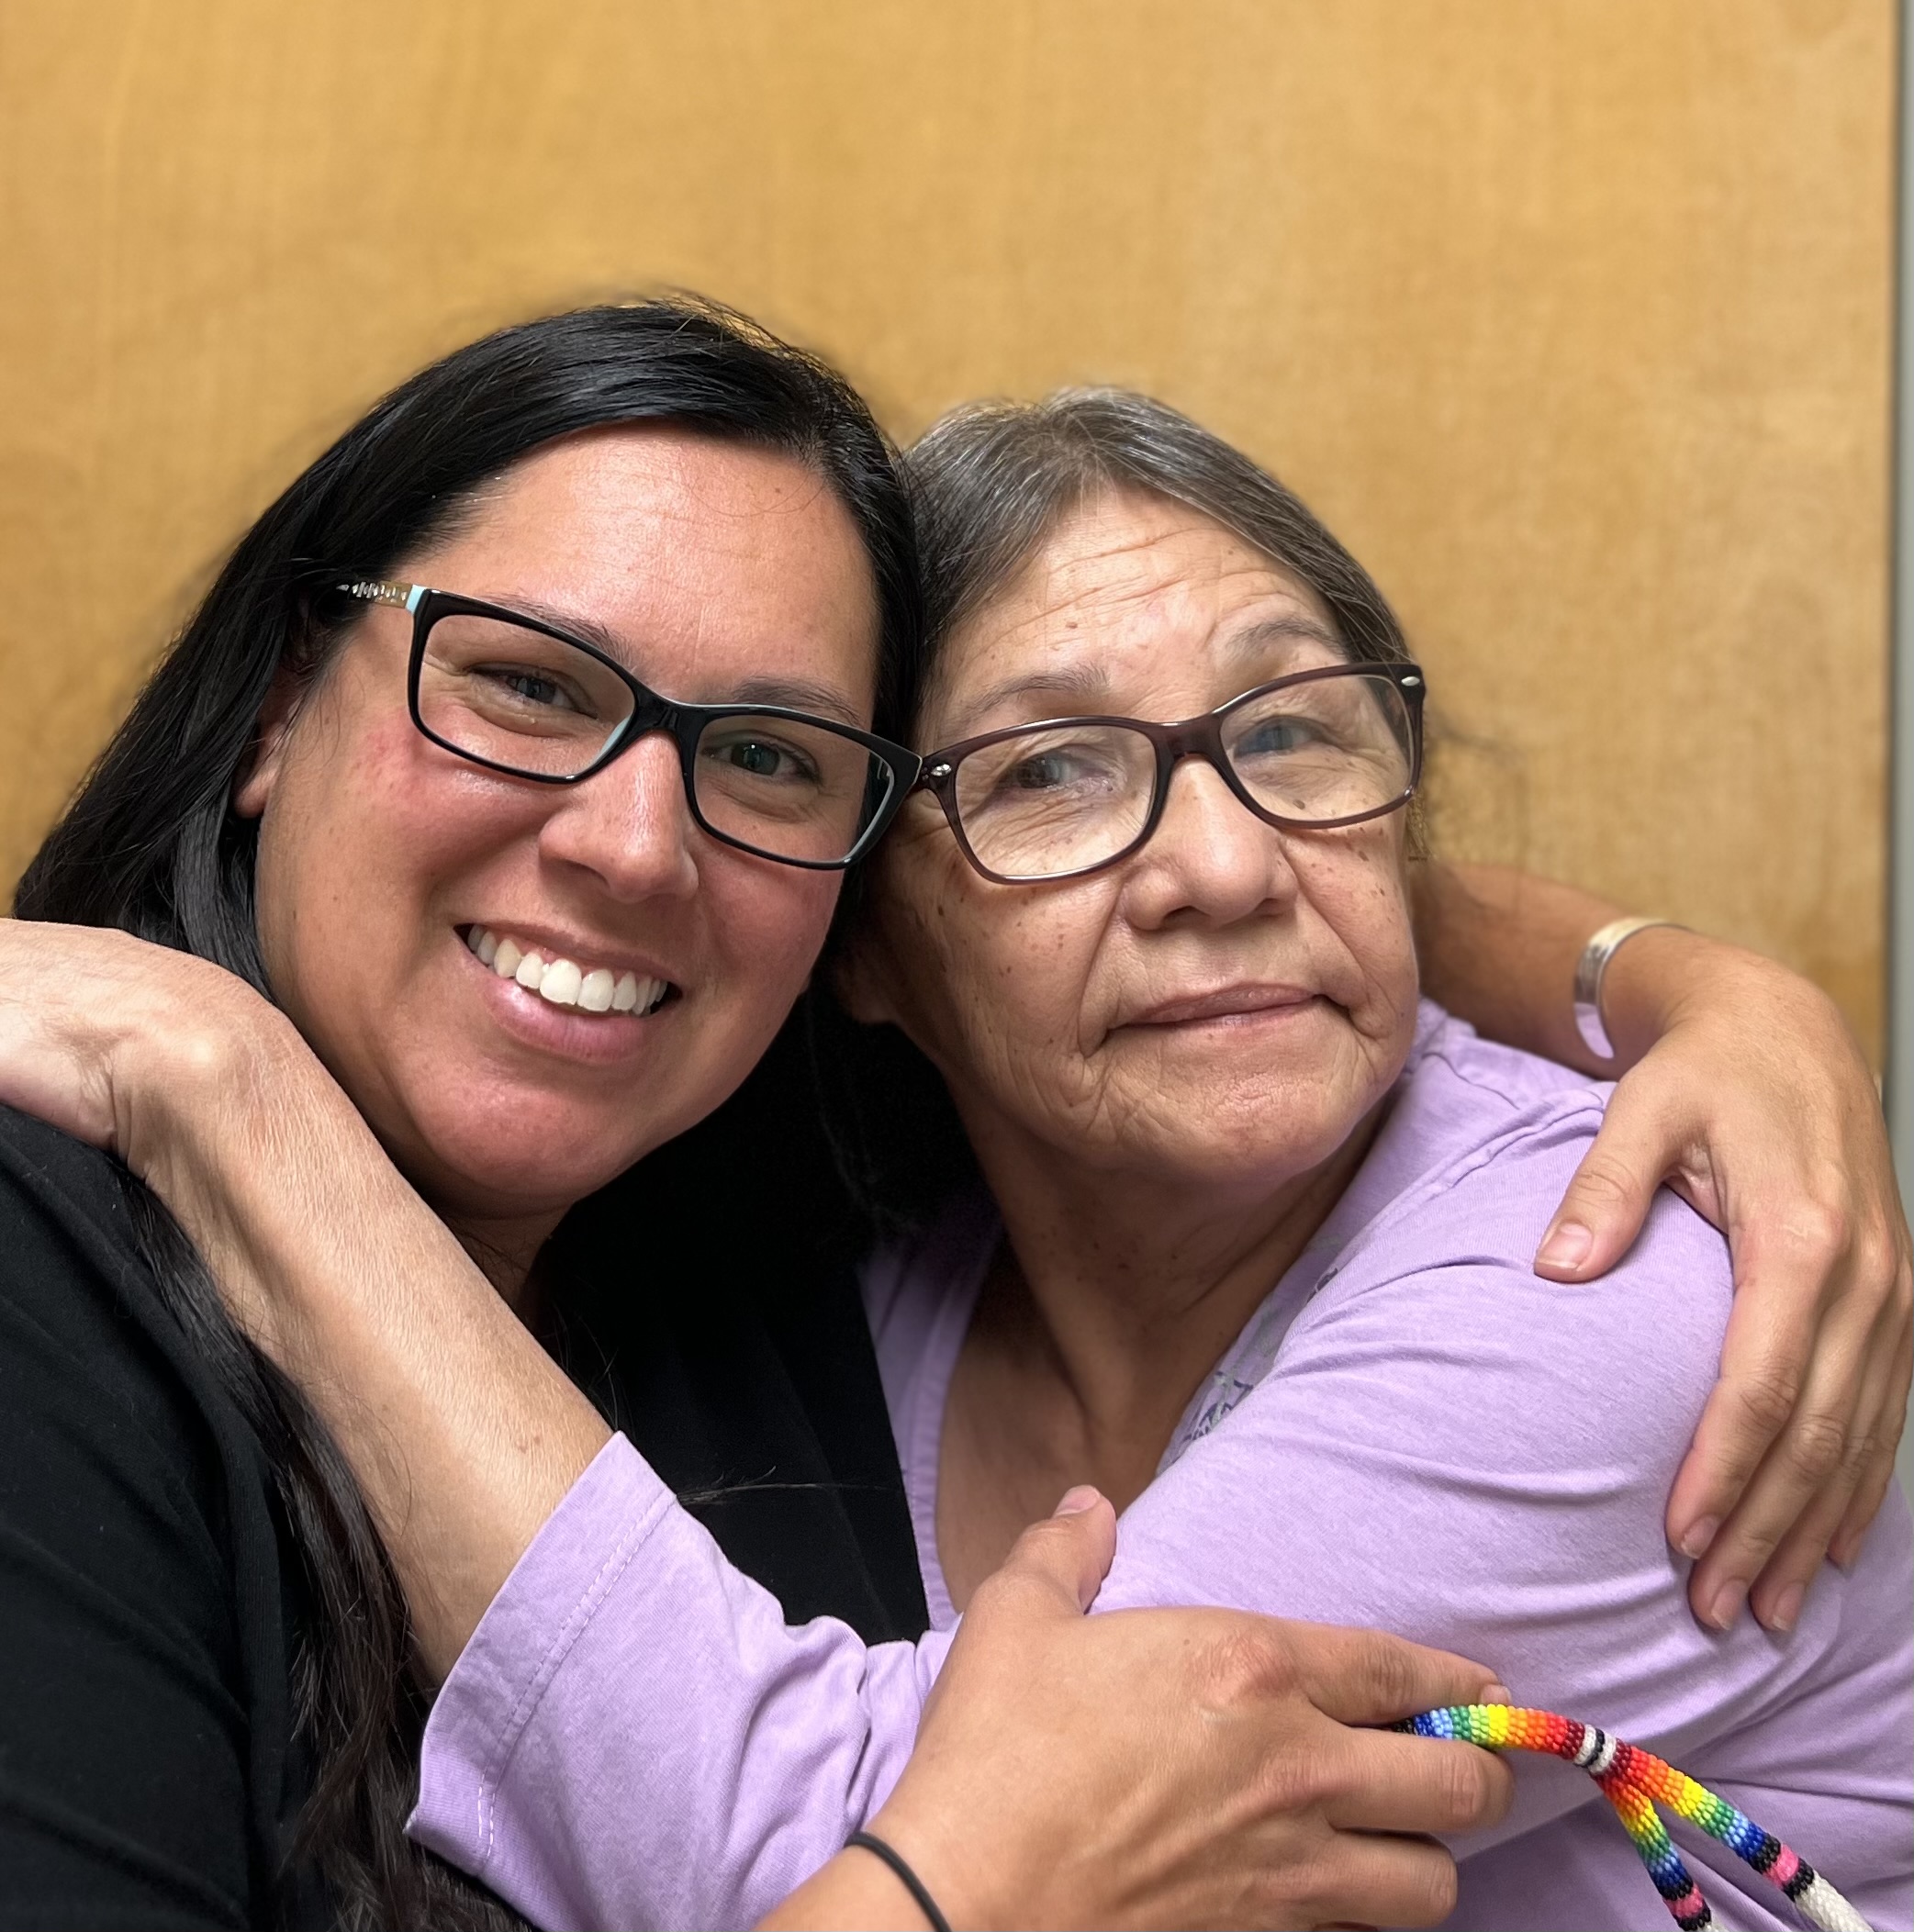 An Indigenous woman with hair in braid hugs an Indigenous woman with brown hair and glasses  